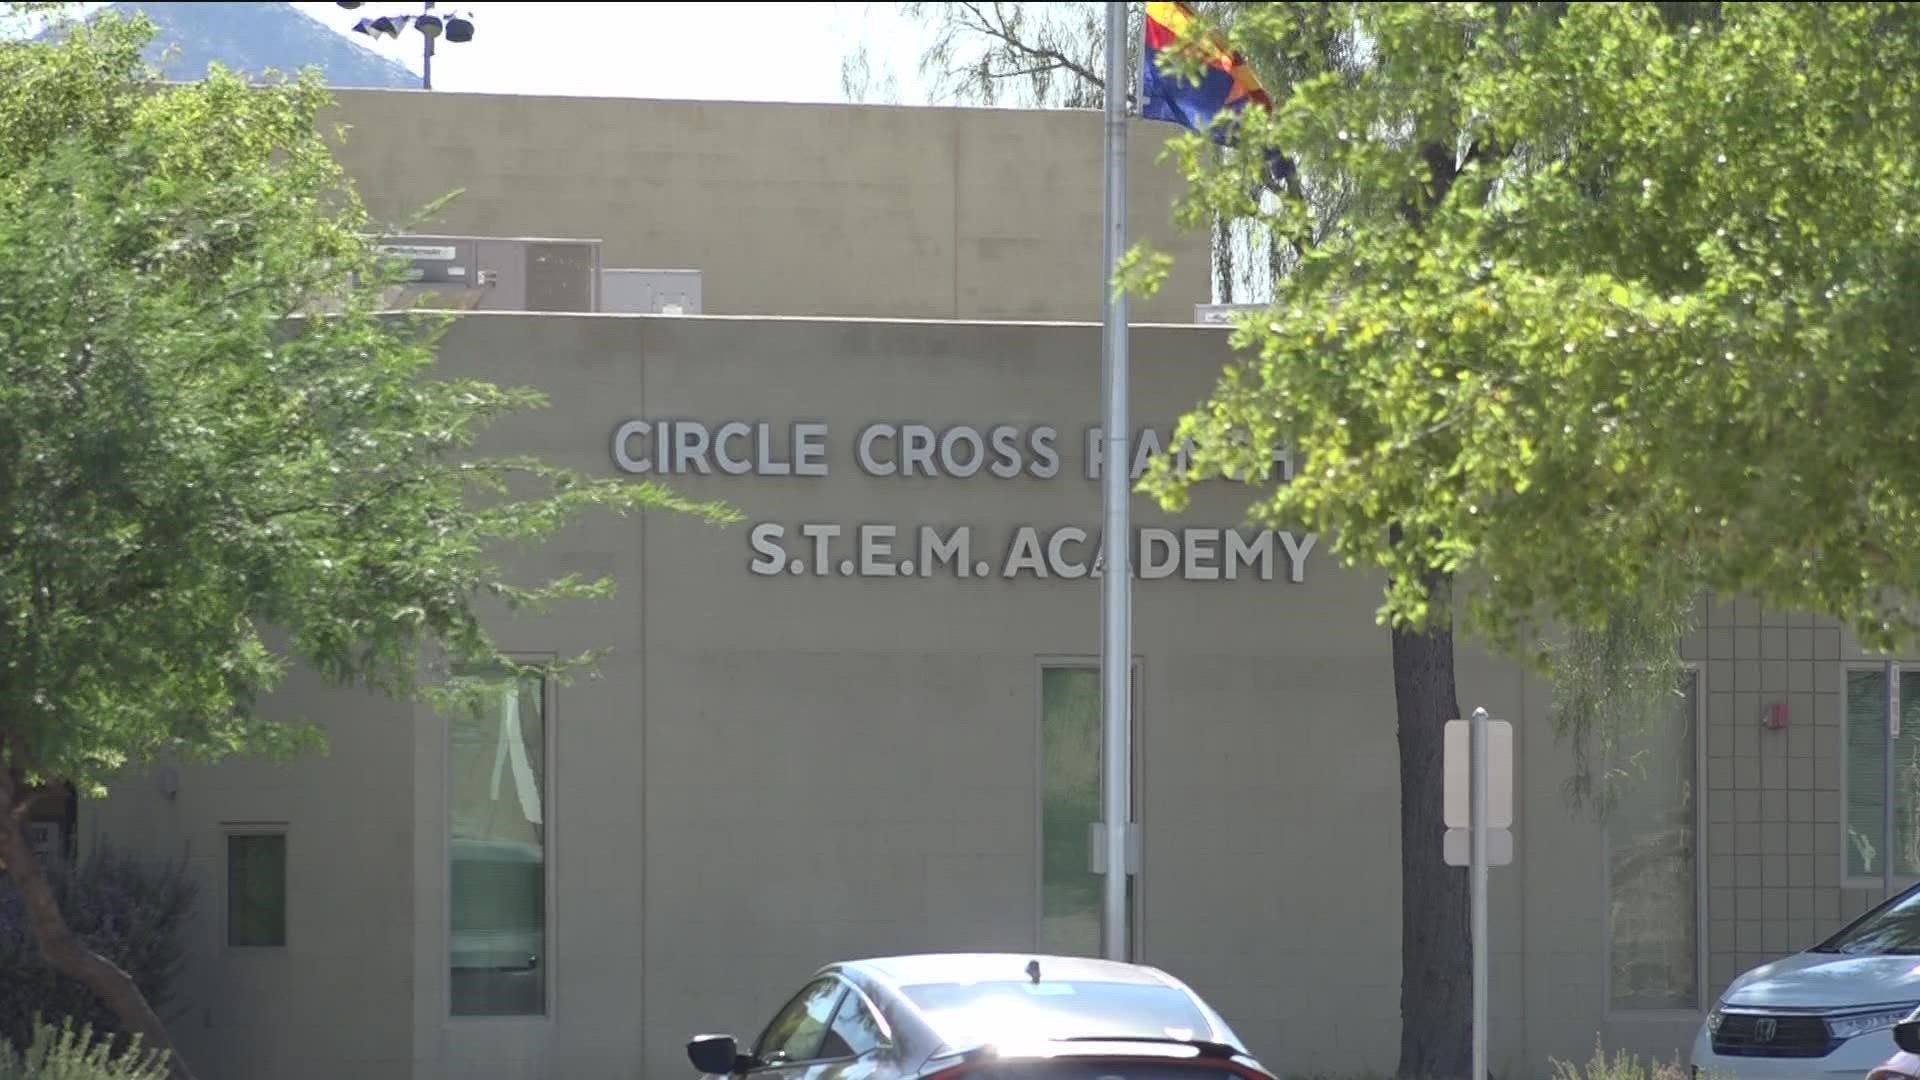 A recent incident at Circle Cross Ranch Academy is one of several similar events reported this last week involving weapons and threats at schools across Arizona.